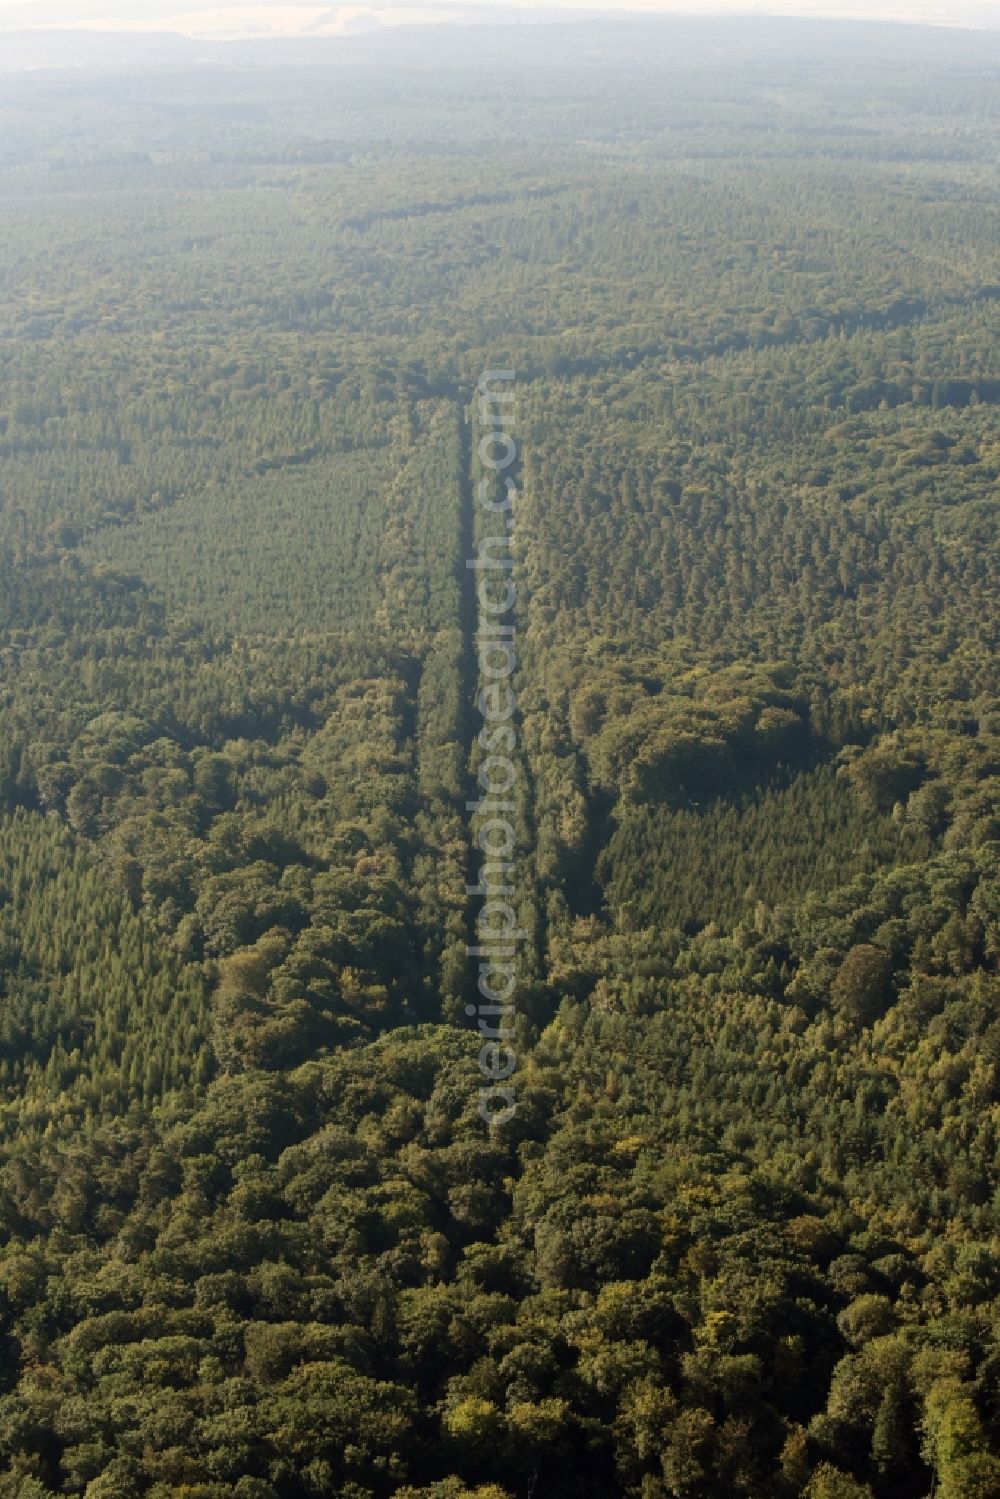 Aerial image Walbeck - Route course of the former inner-German border between the GDR German Democratic Republic and the Federal Republic of Germany Federal Republic of Germany in a renatured forest near Walbeck in the state Saxony-Anhalt